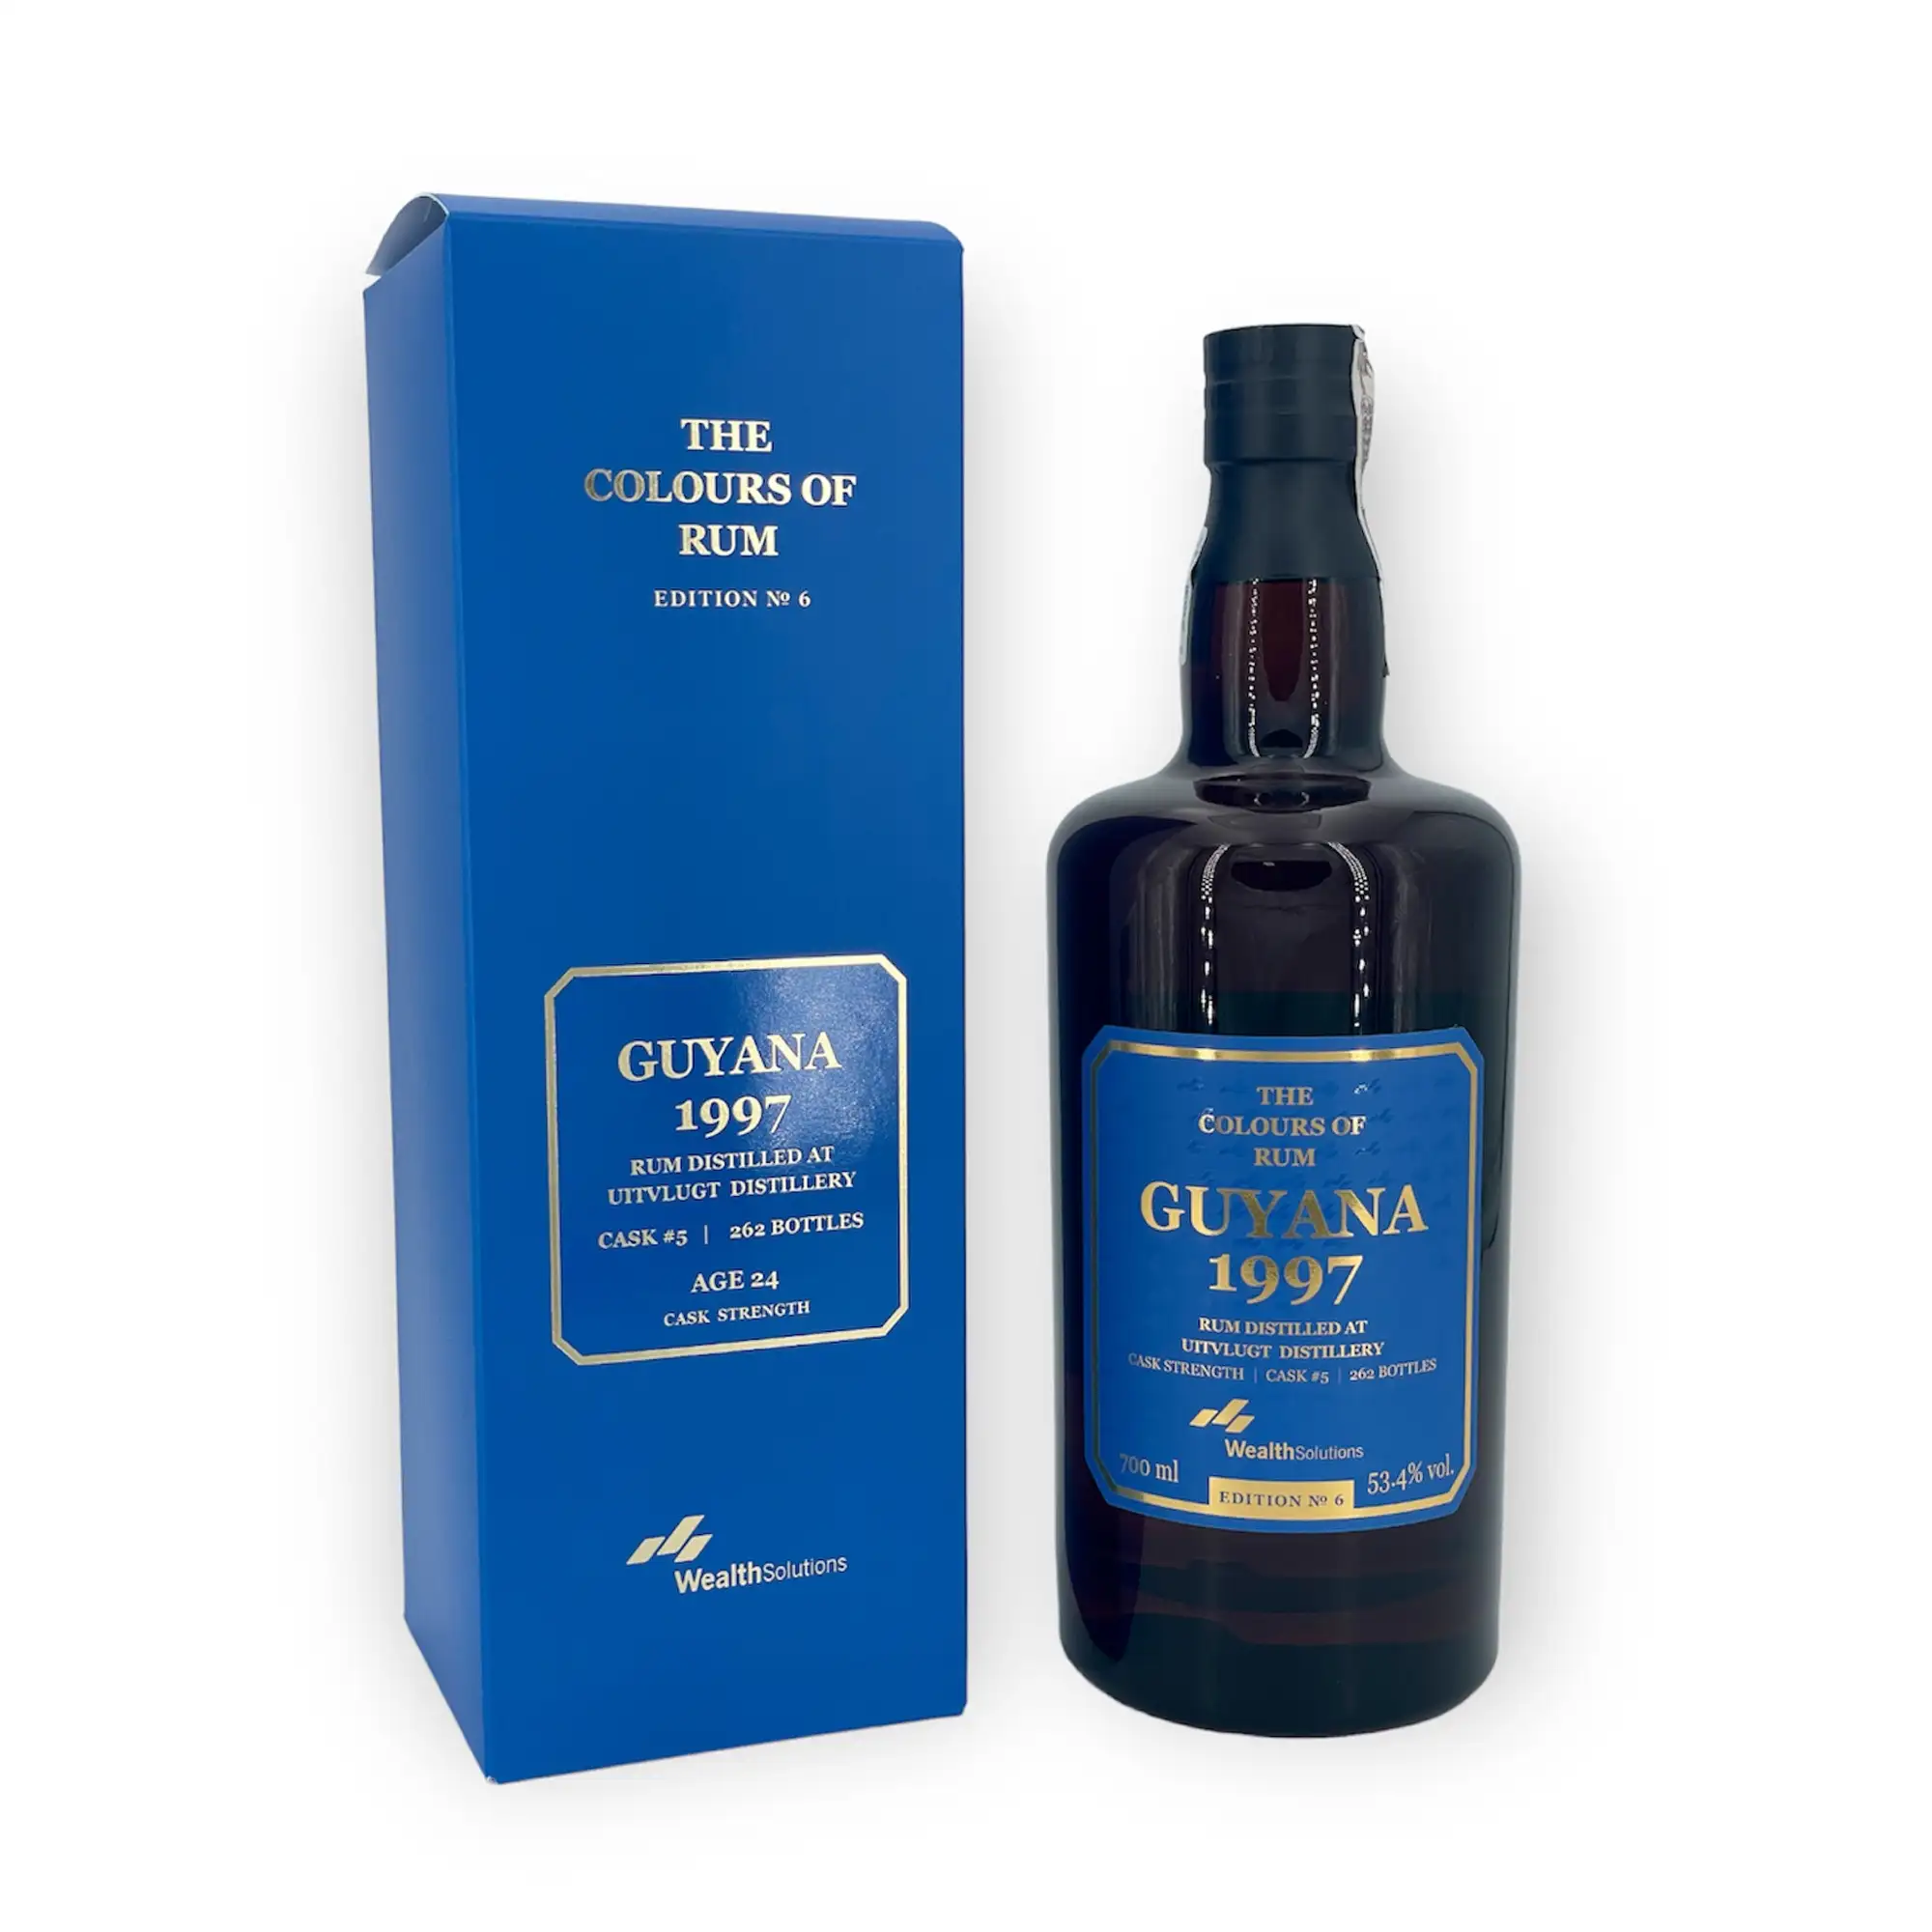 Image of the front of the bottle of the rum Guyana No. 6